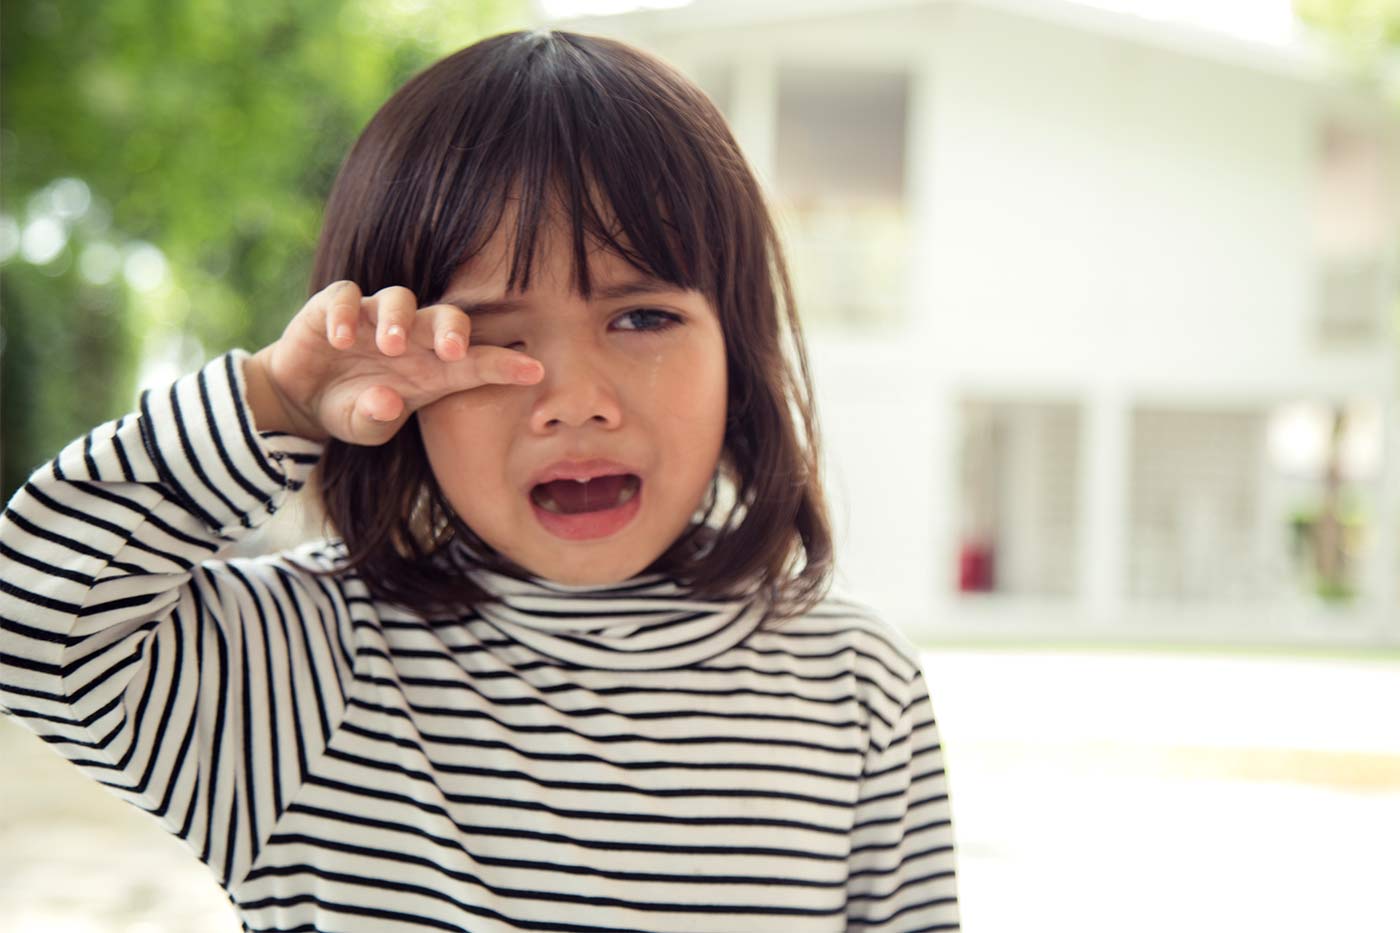 How to Deal with a Child That Cries Over Everything